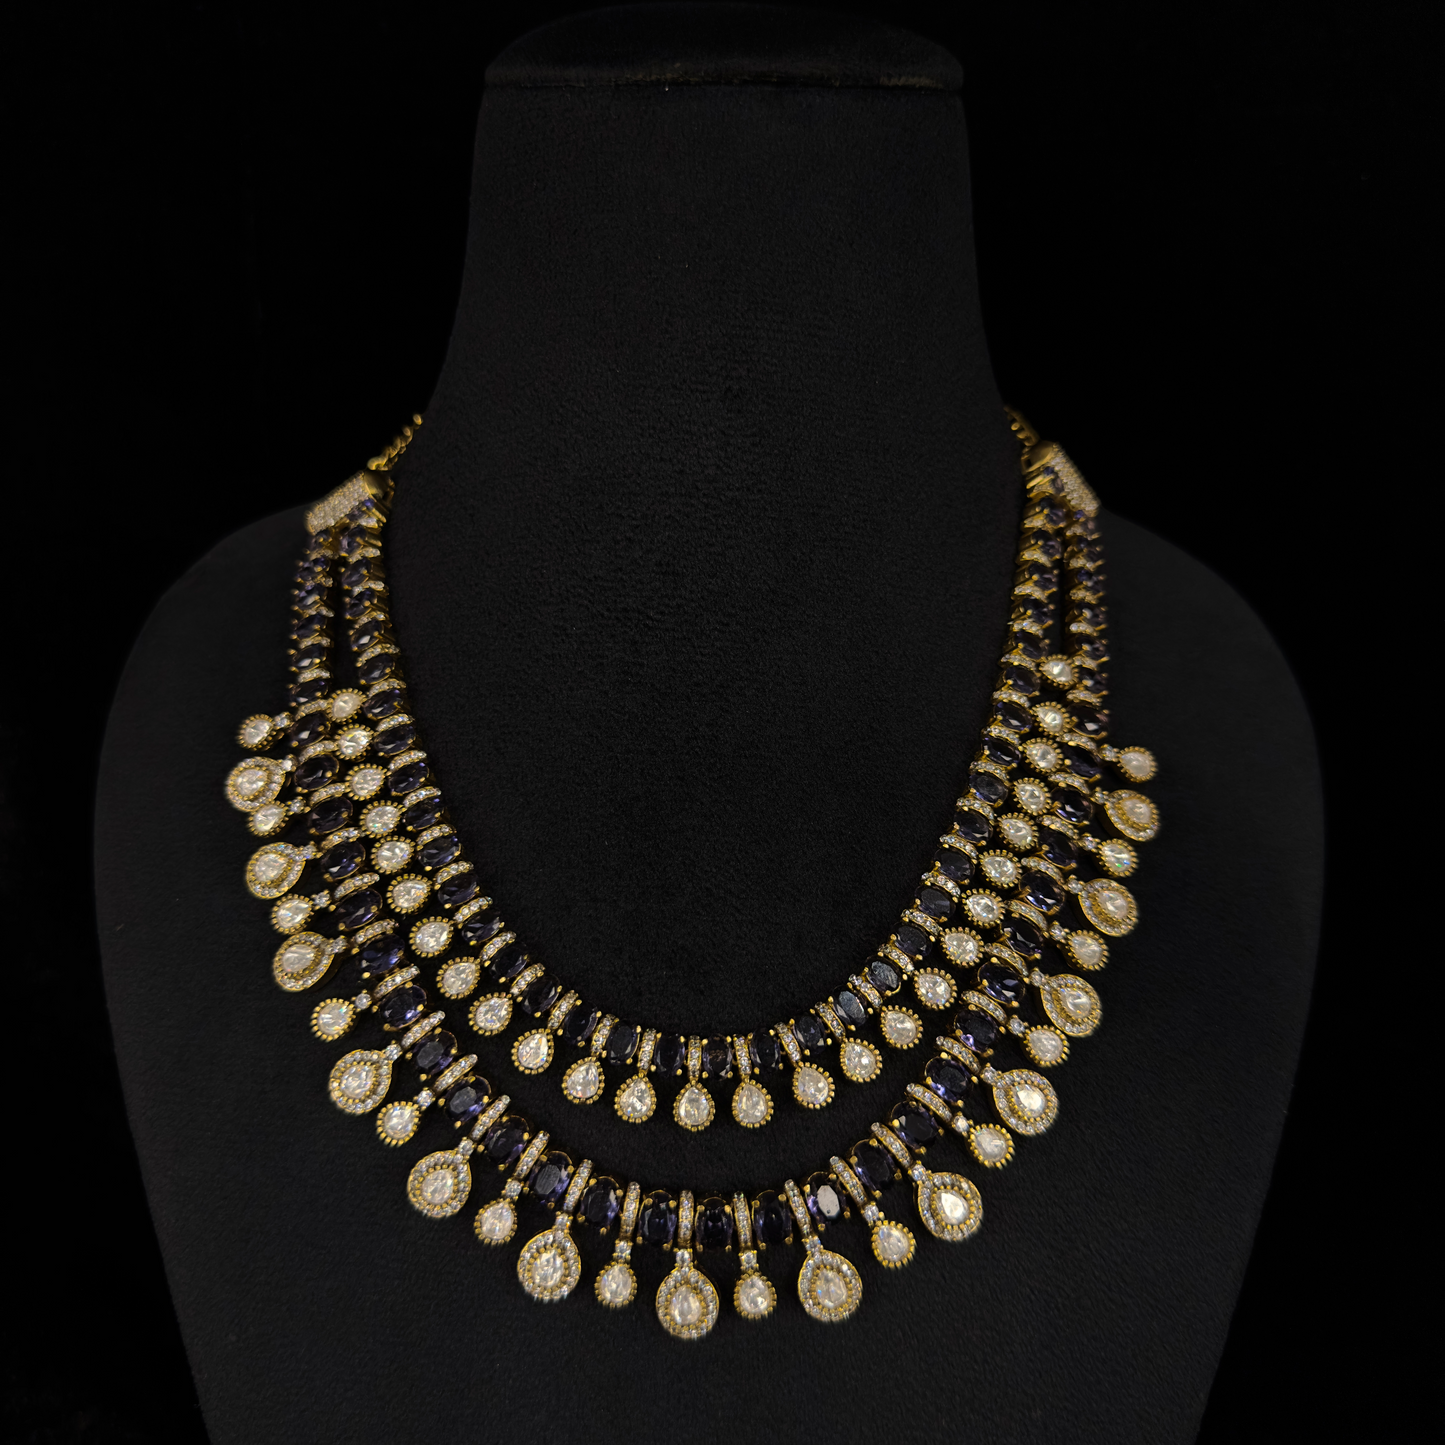 Gorgeous Two-Step Victorian Necklace with drop earrings